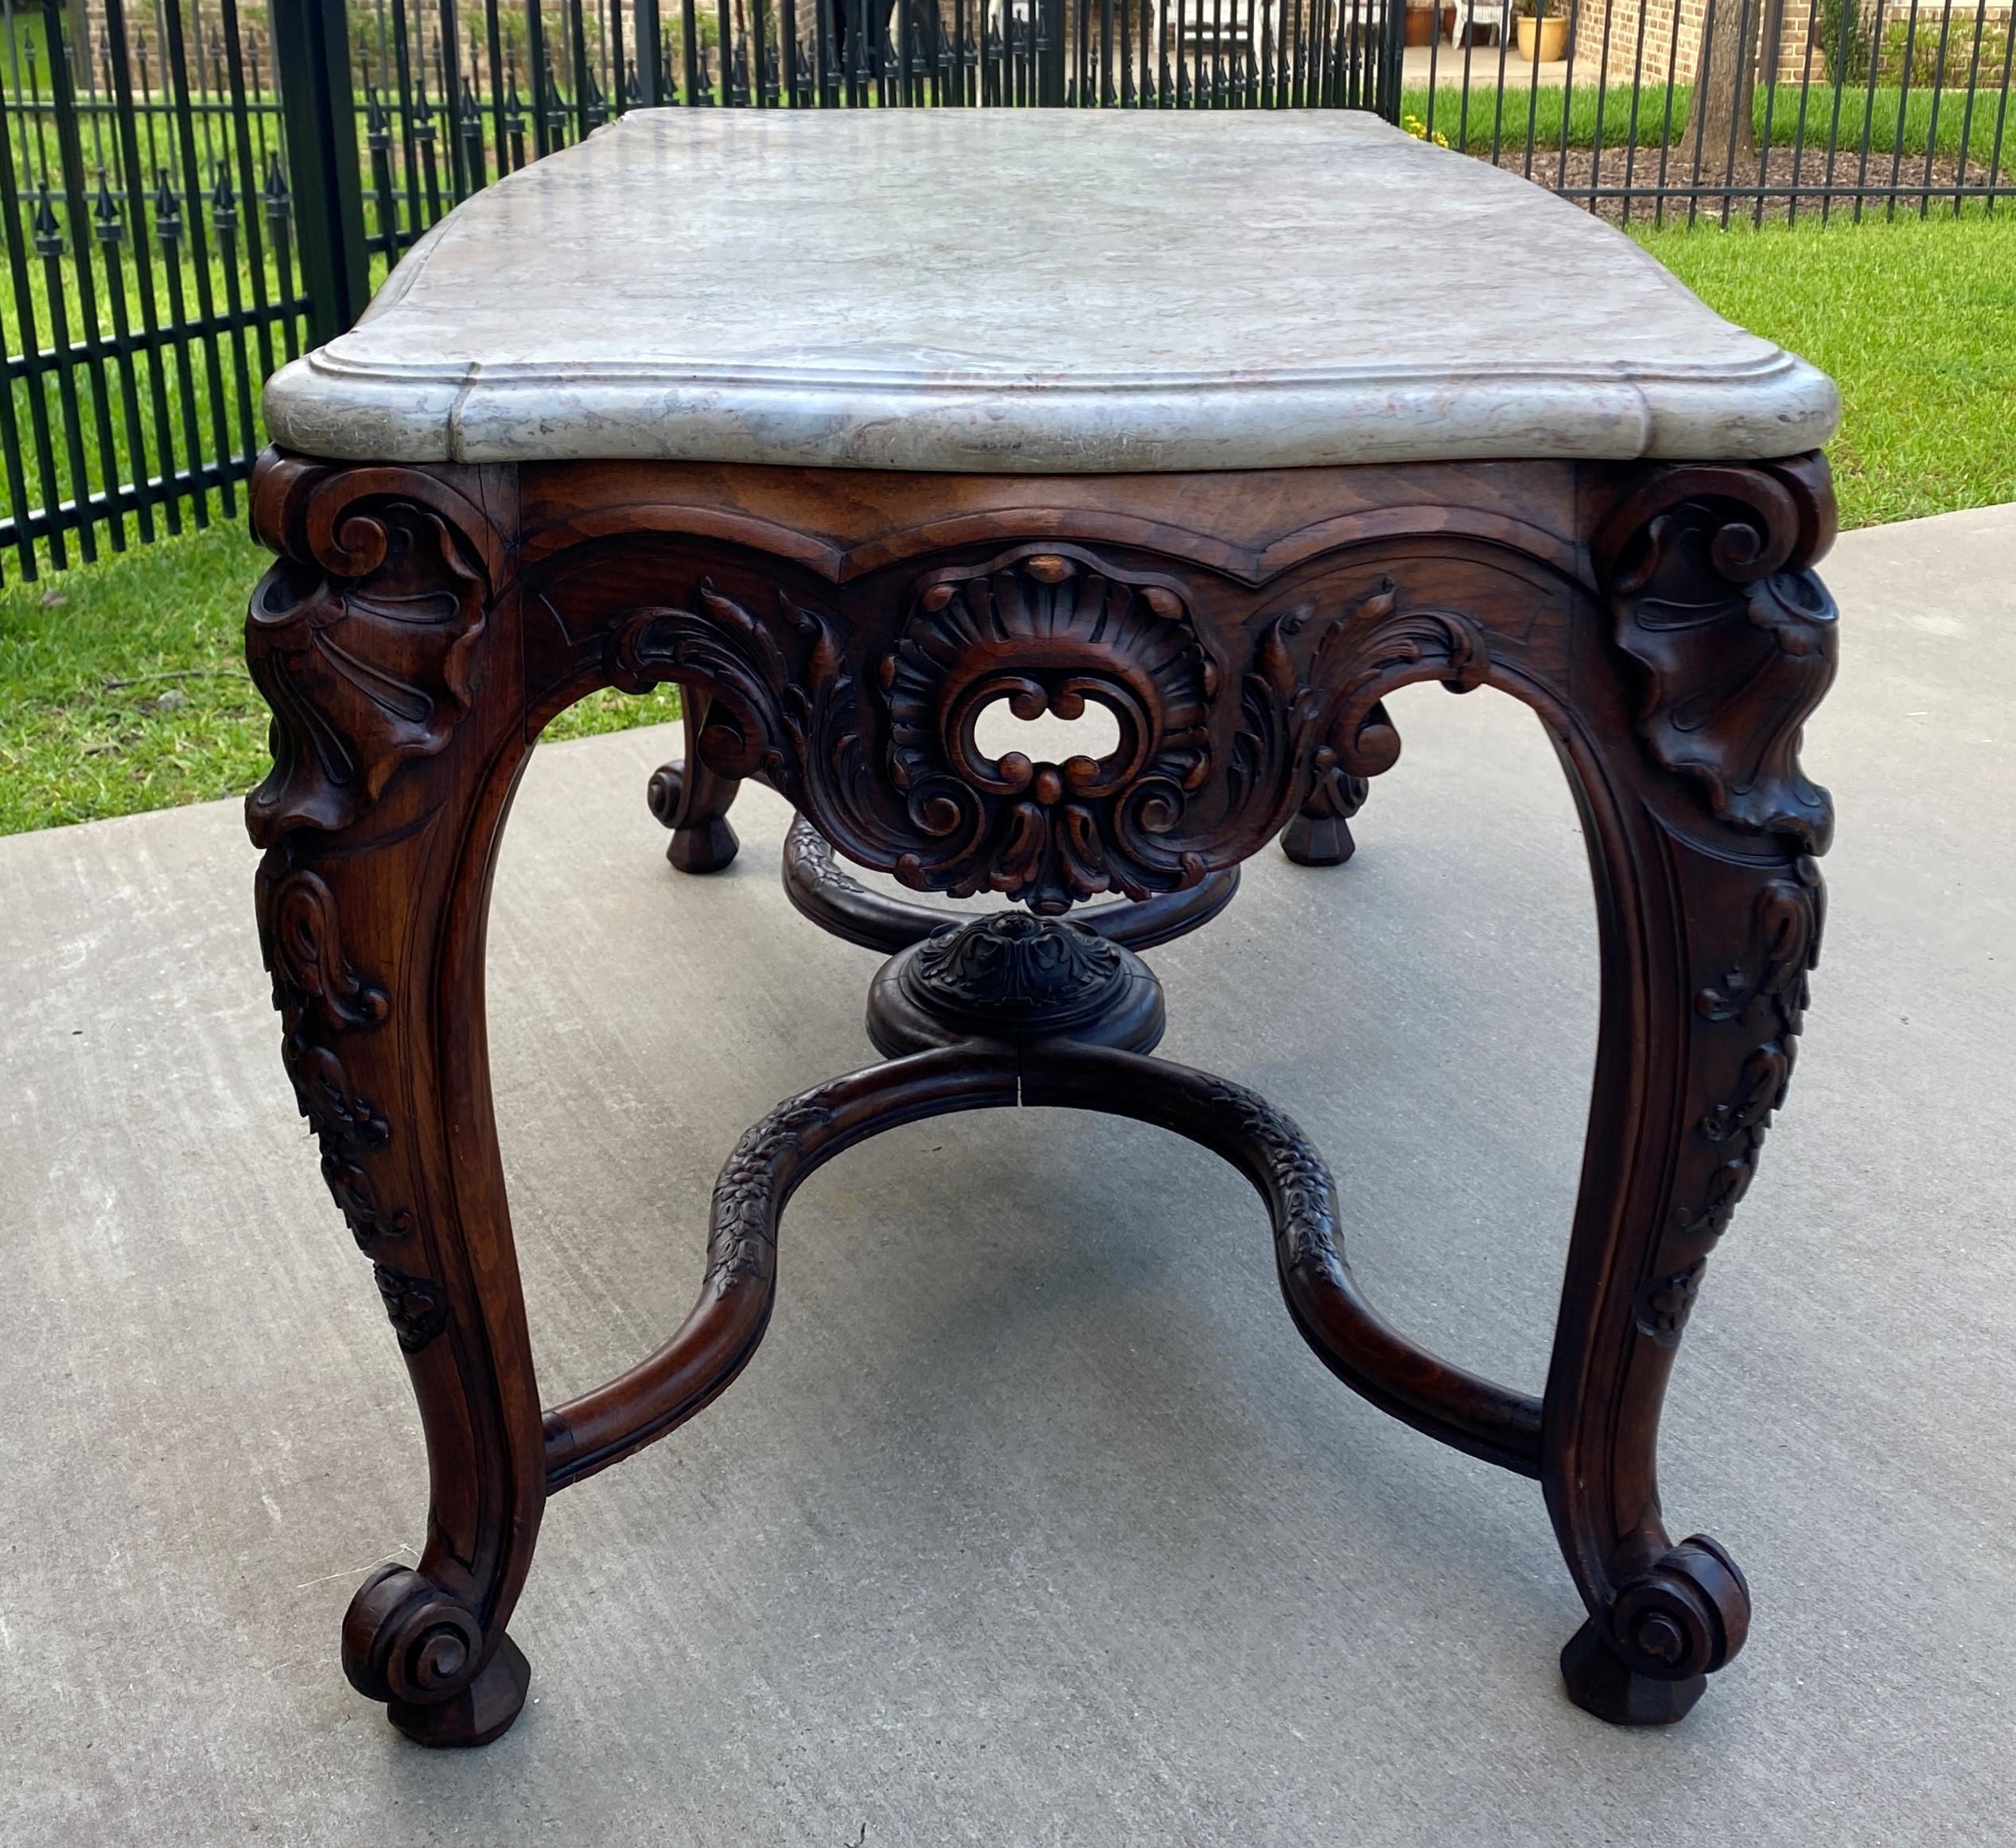 Exquisite antique French walnut Louis XV style highly carved console or sofa table with marble top~~c. 1900
Highly carved antique French Louis XV style walnut console or sofa table with shaped marble top over highly carved pierced foliate shell 8